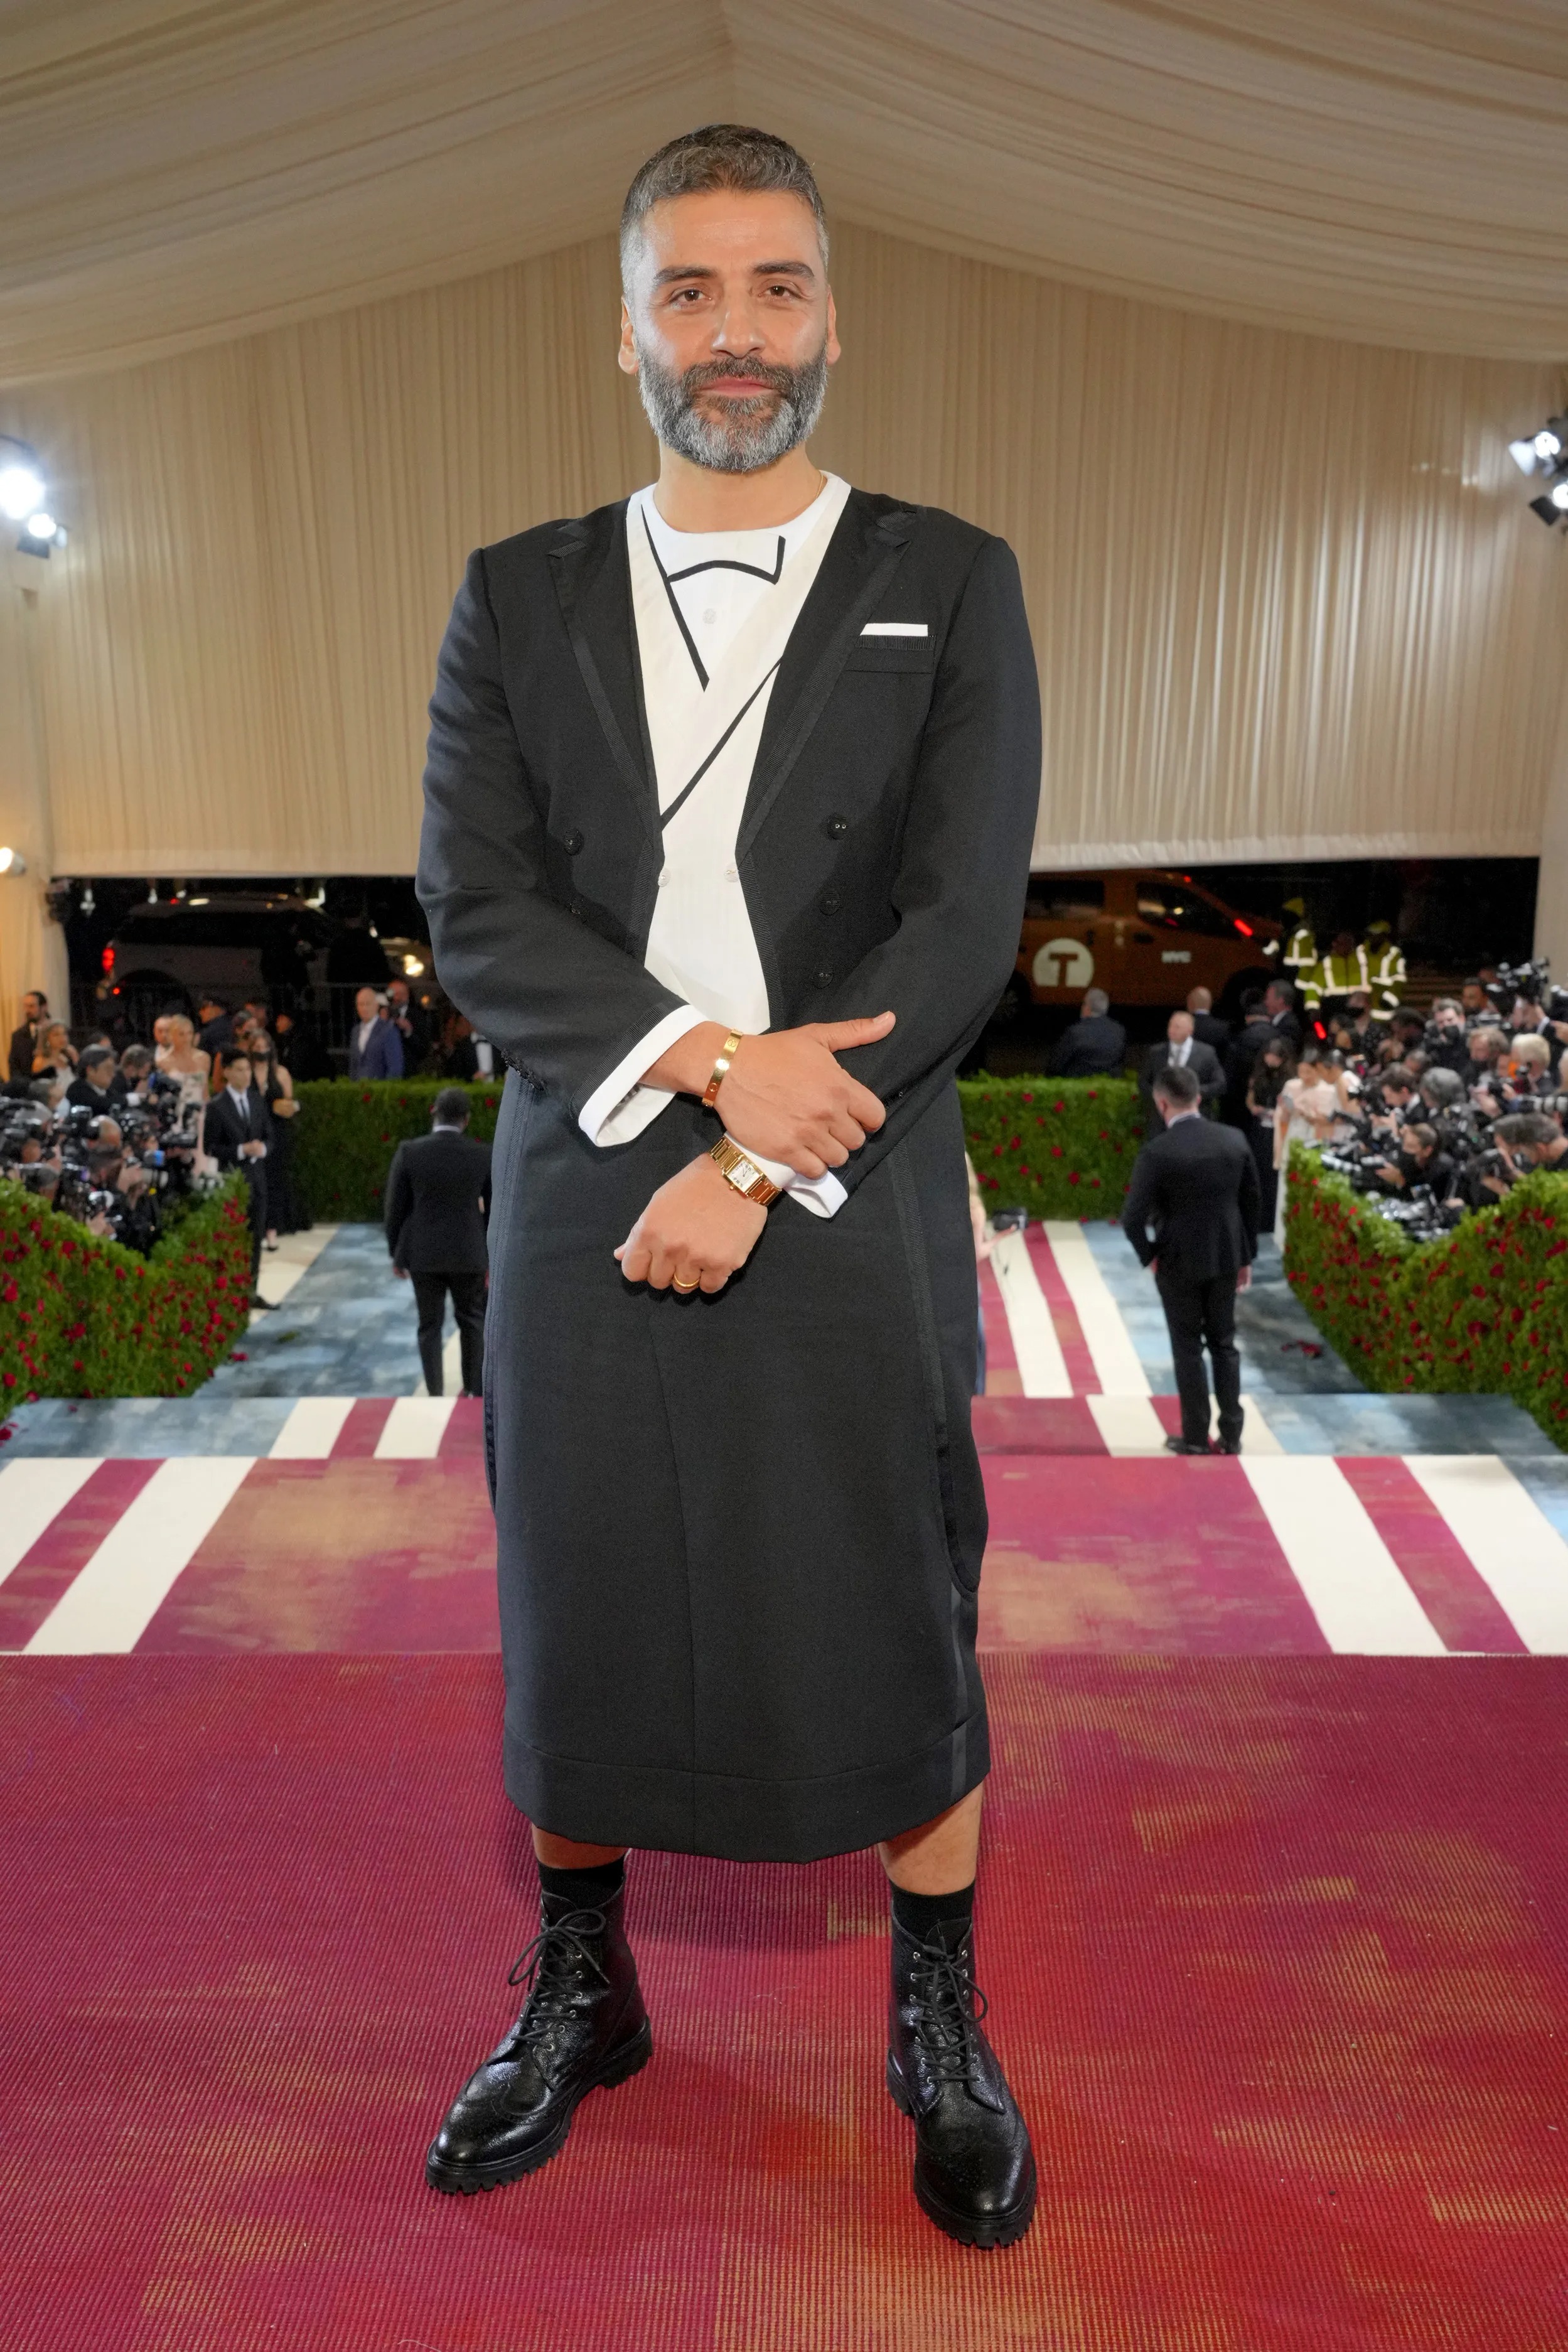 Oscar Isaac, one of the many men wearing skirts